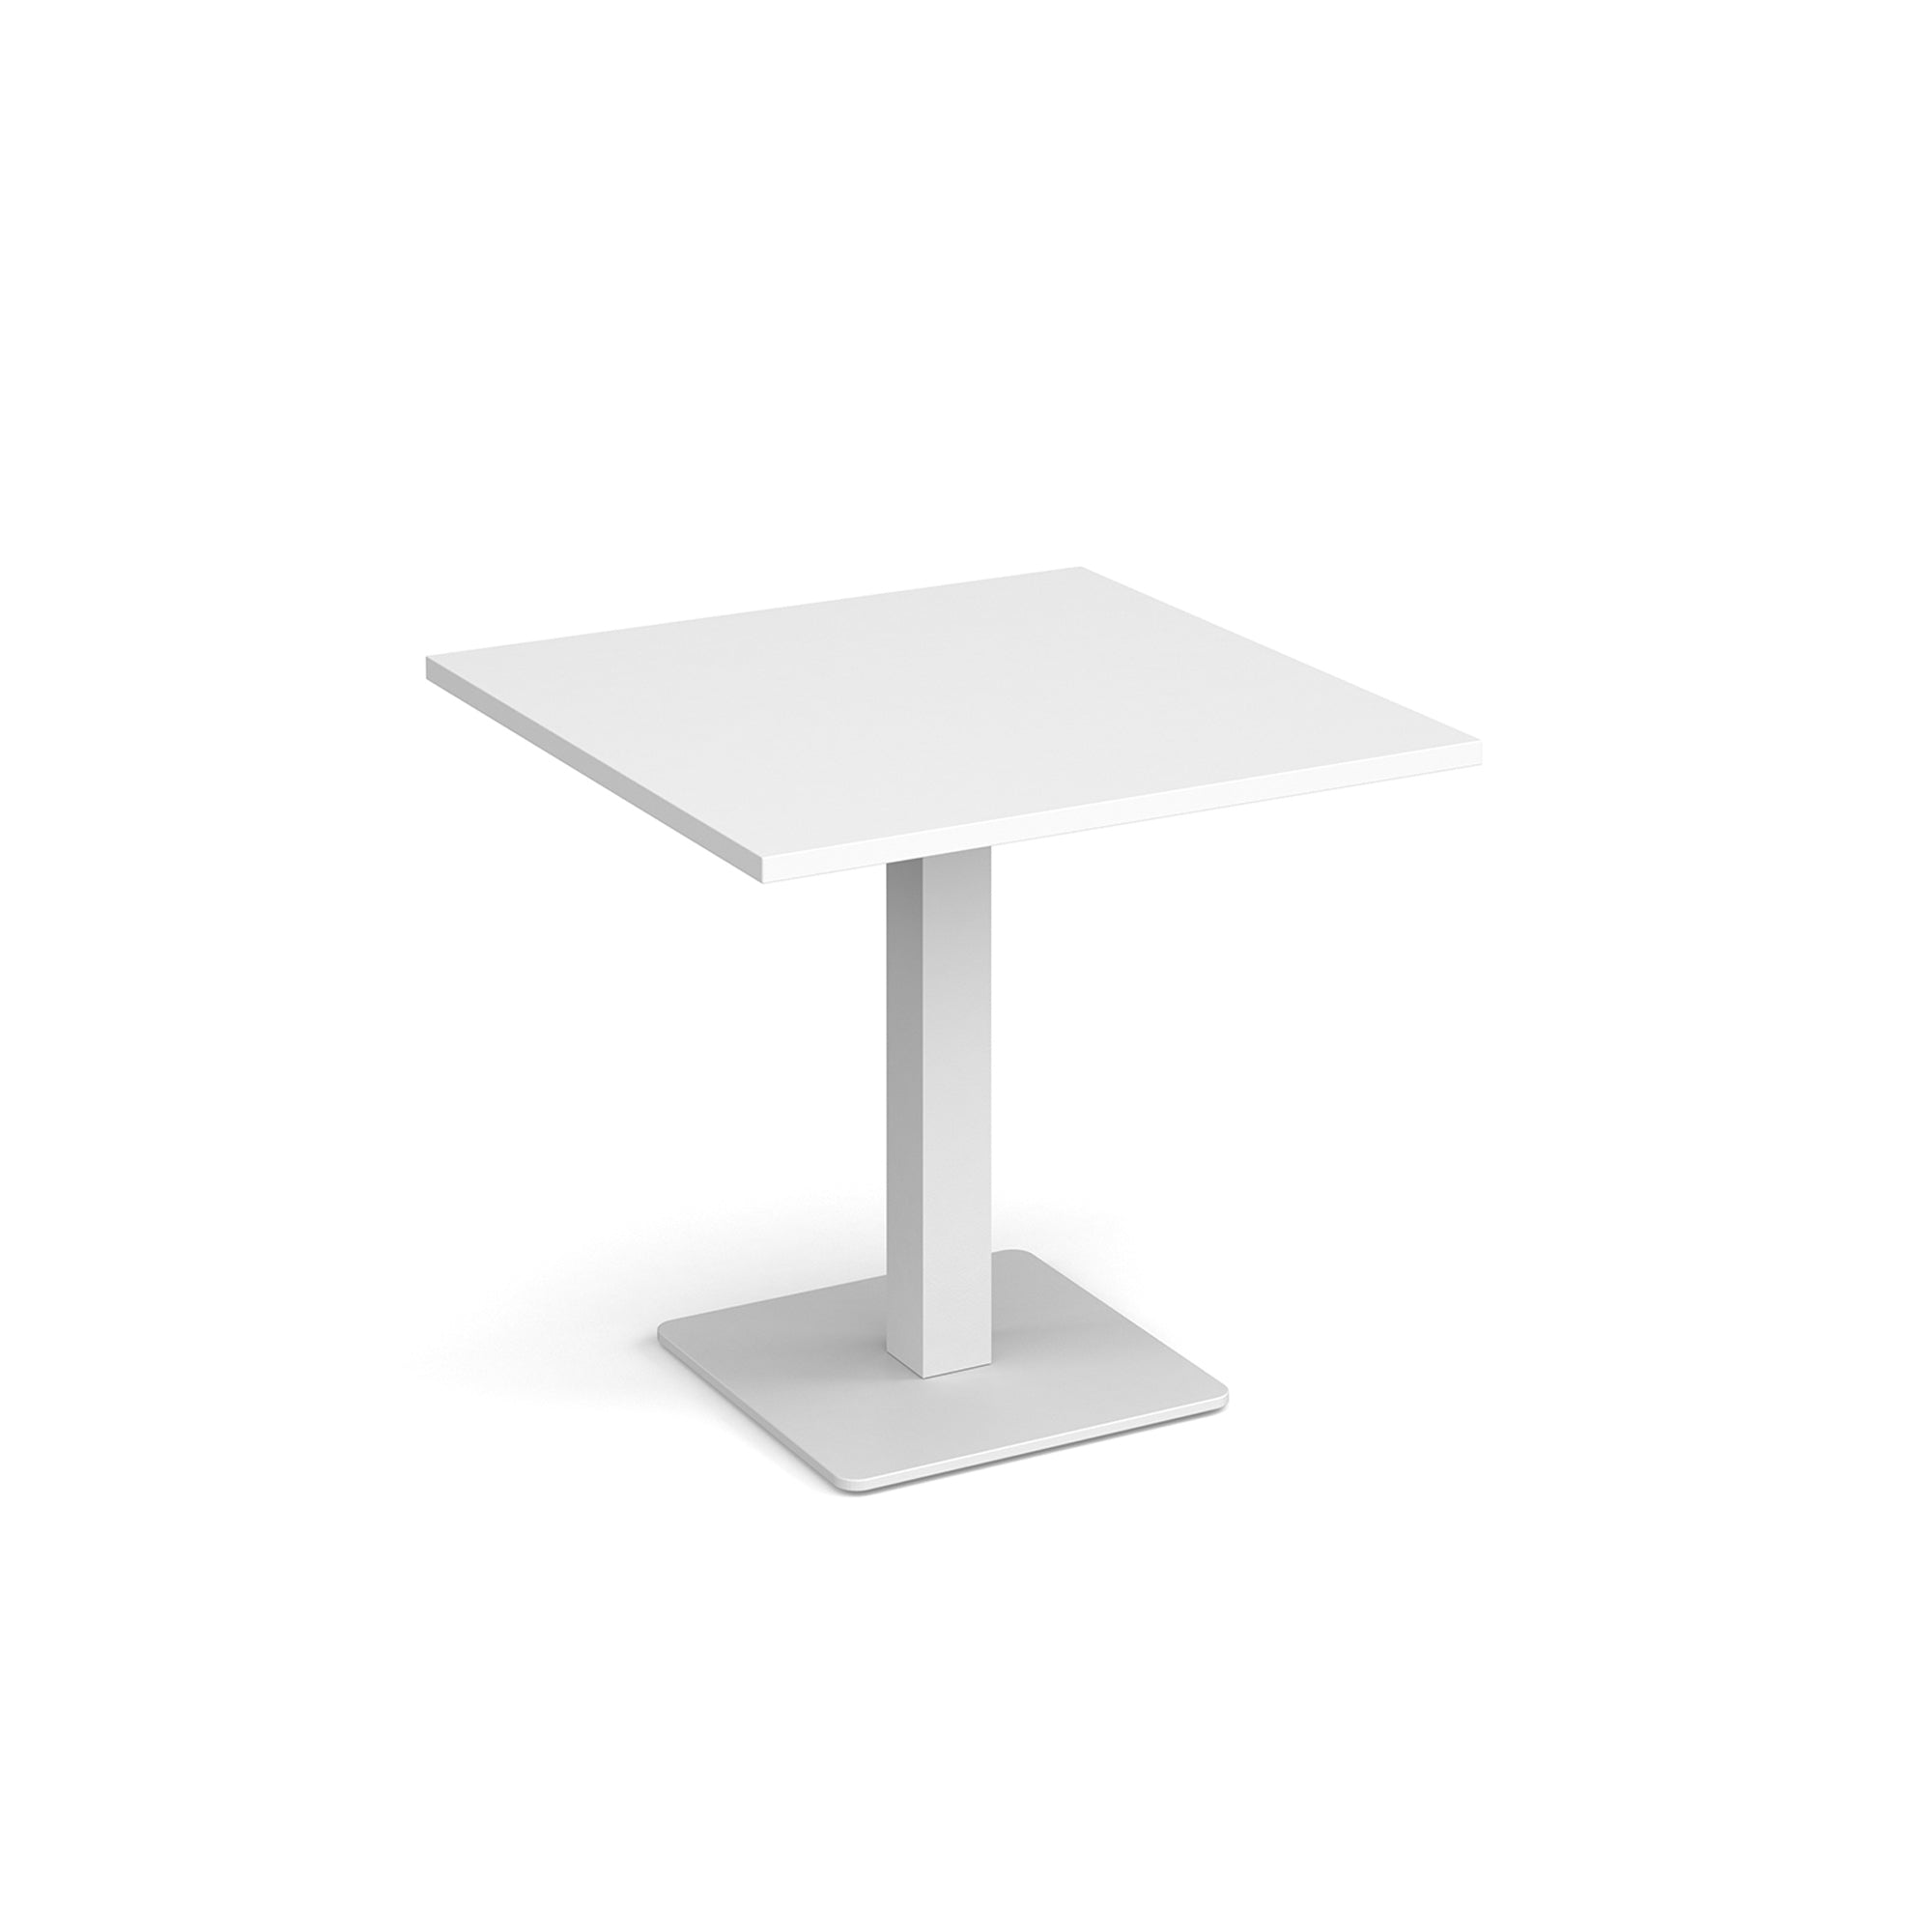 Brescia square dining table - Office Products Online